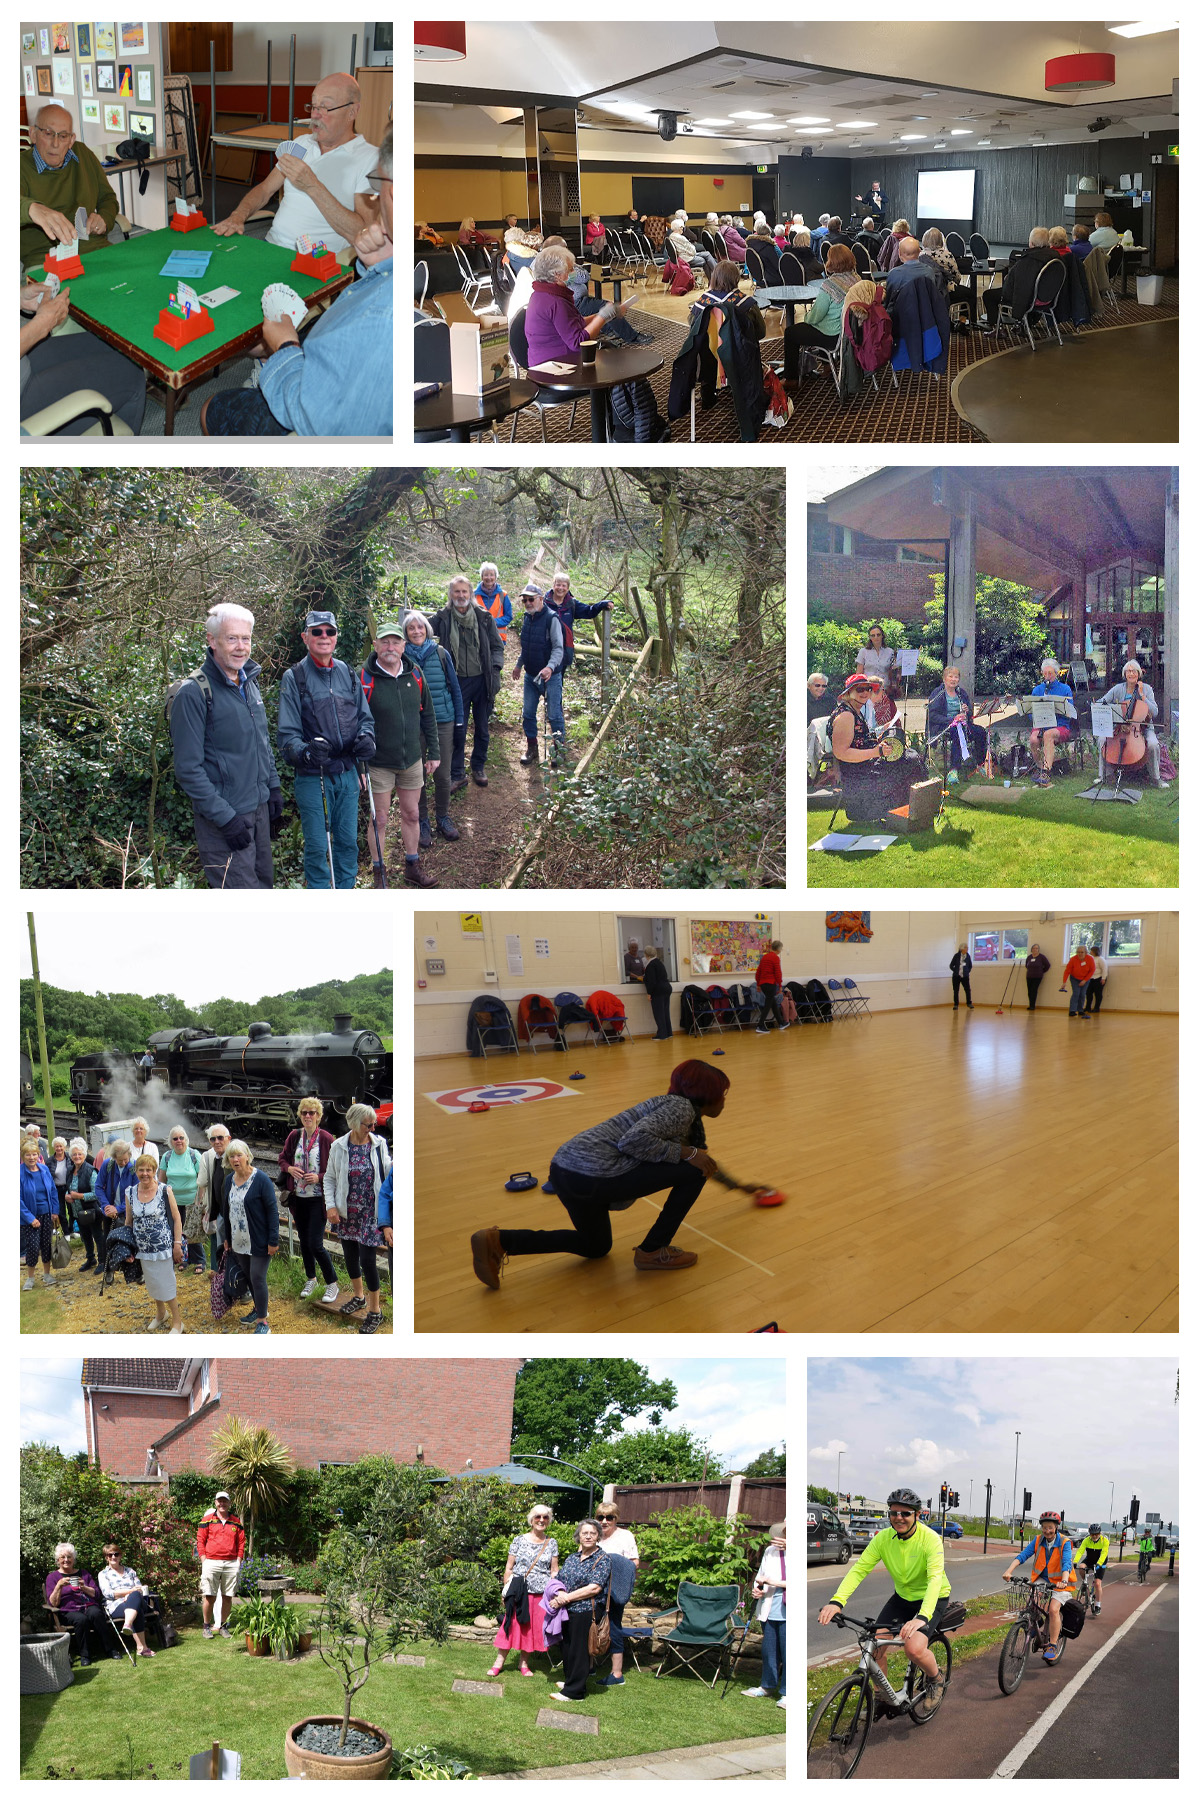 Some Yeovil u3a activities